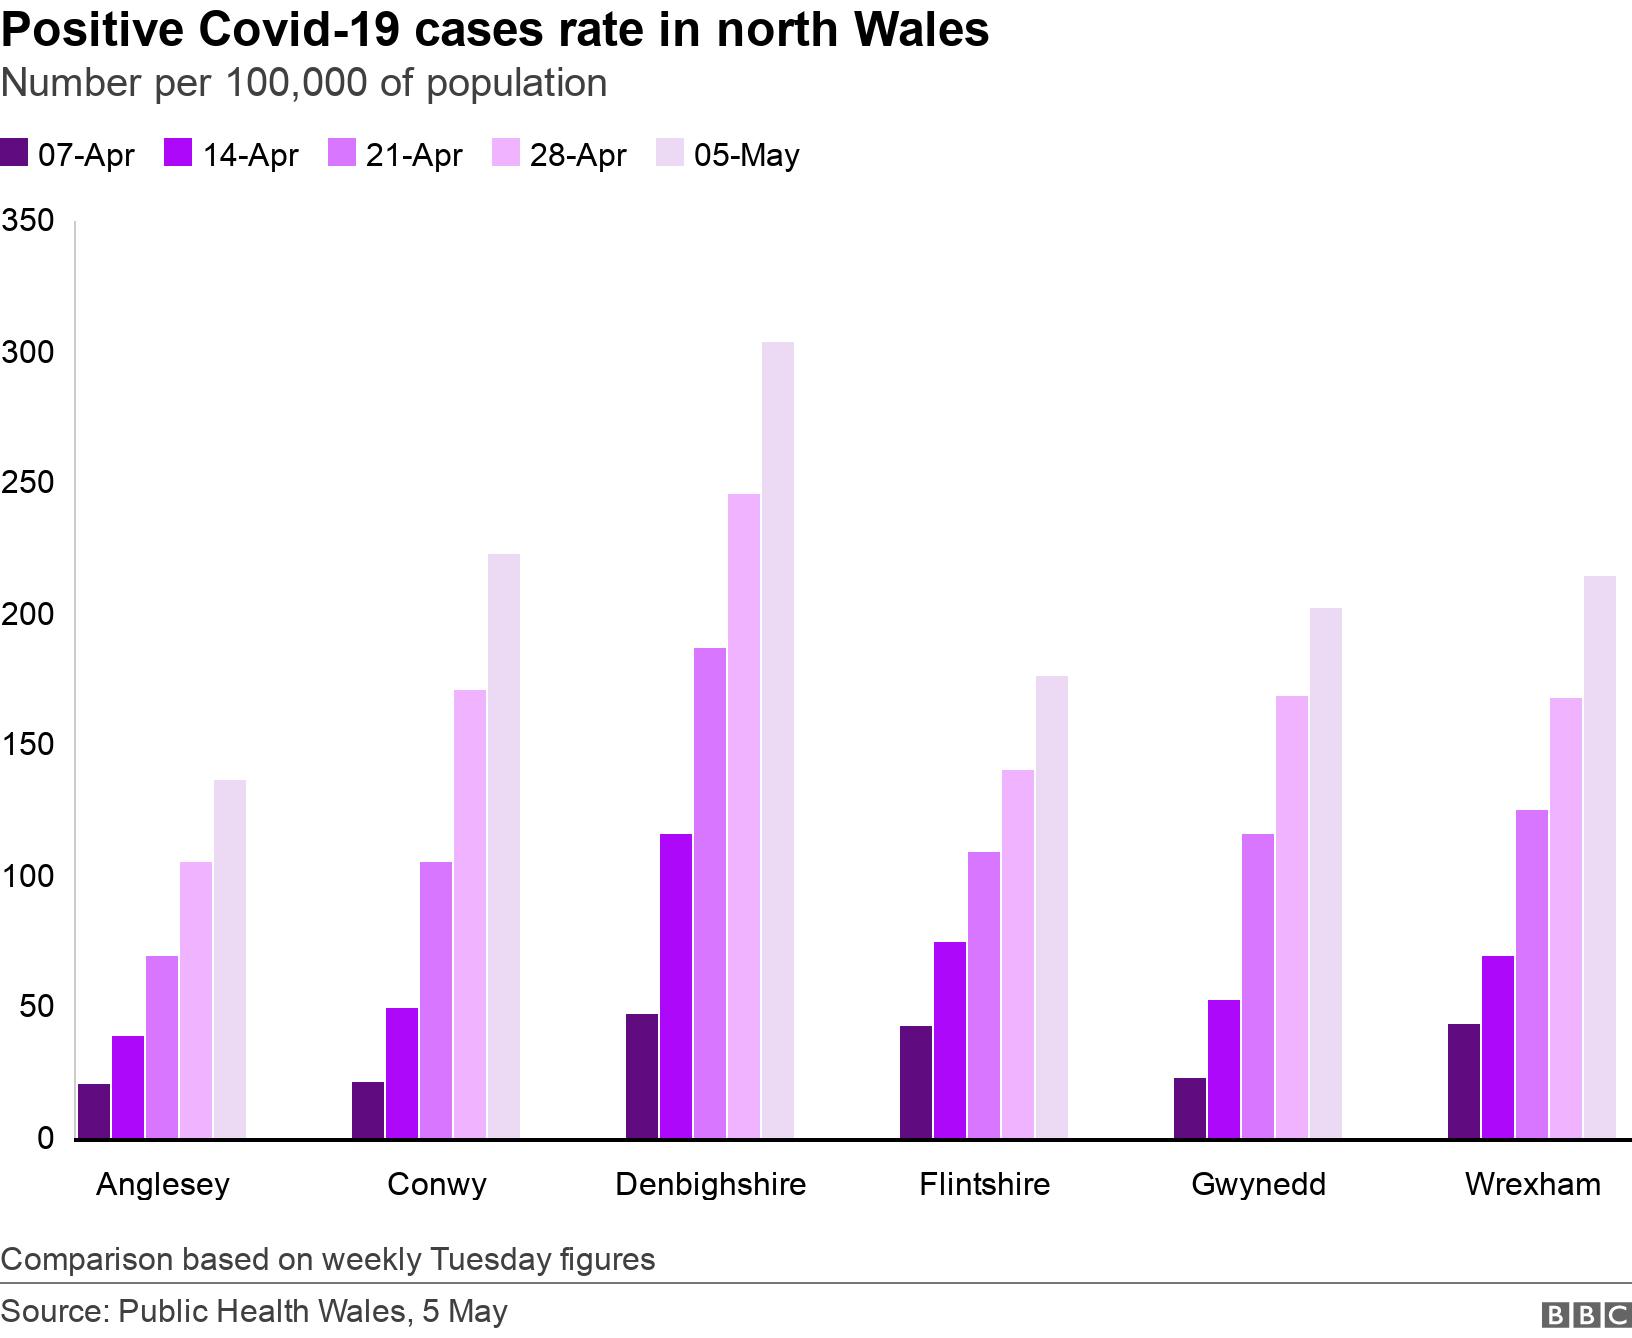 Positive Covid-19 cases rate in north Wales. Number per 100,000 of population.  Comparison based on weekly Tuesday figures.